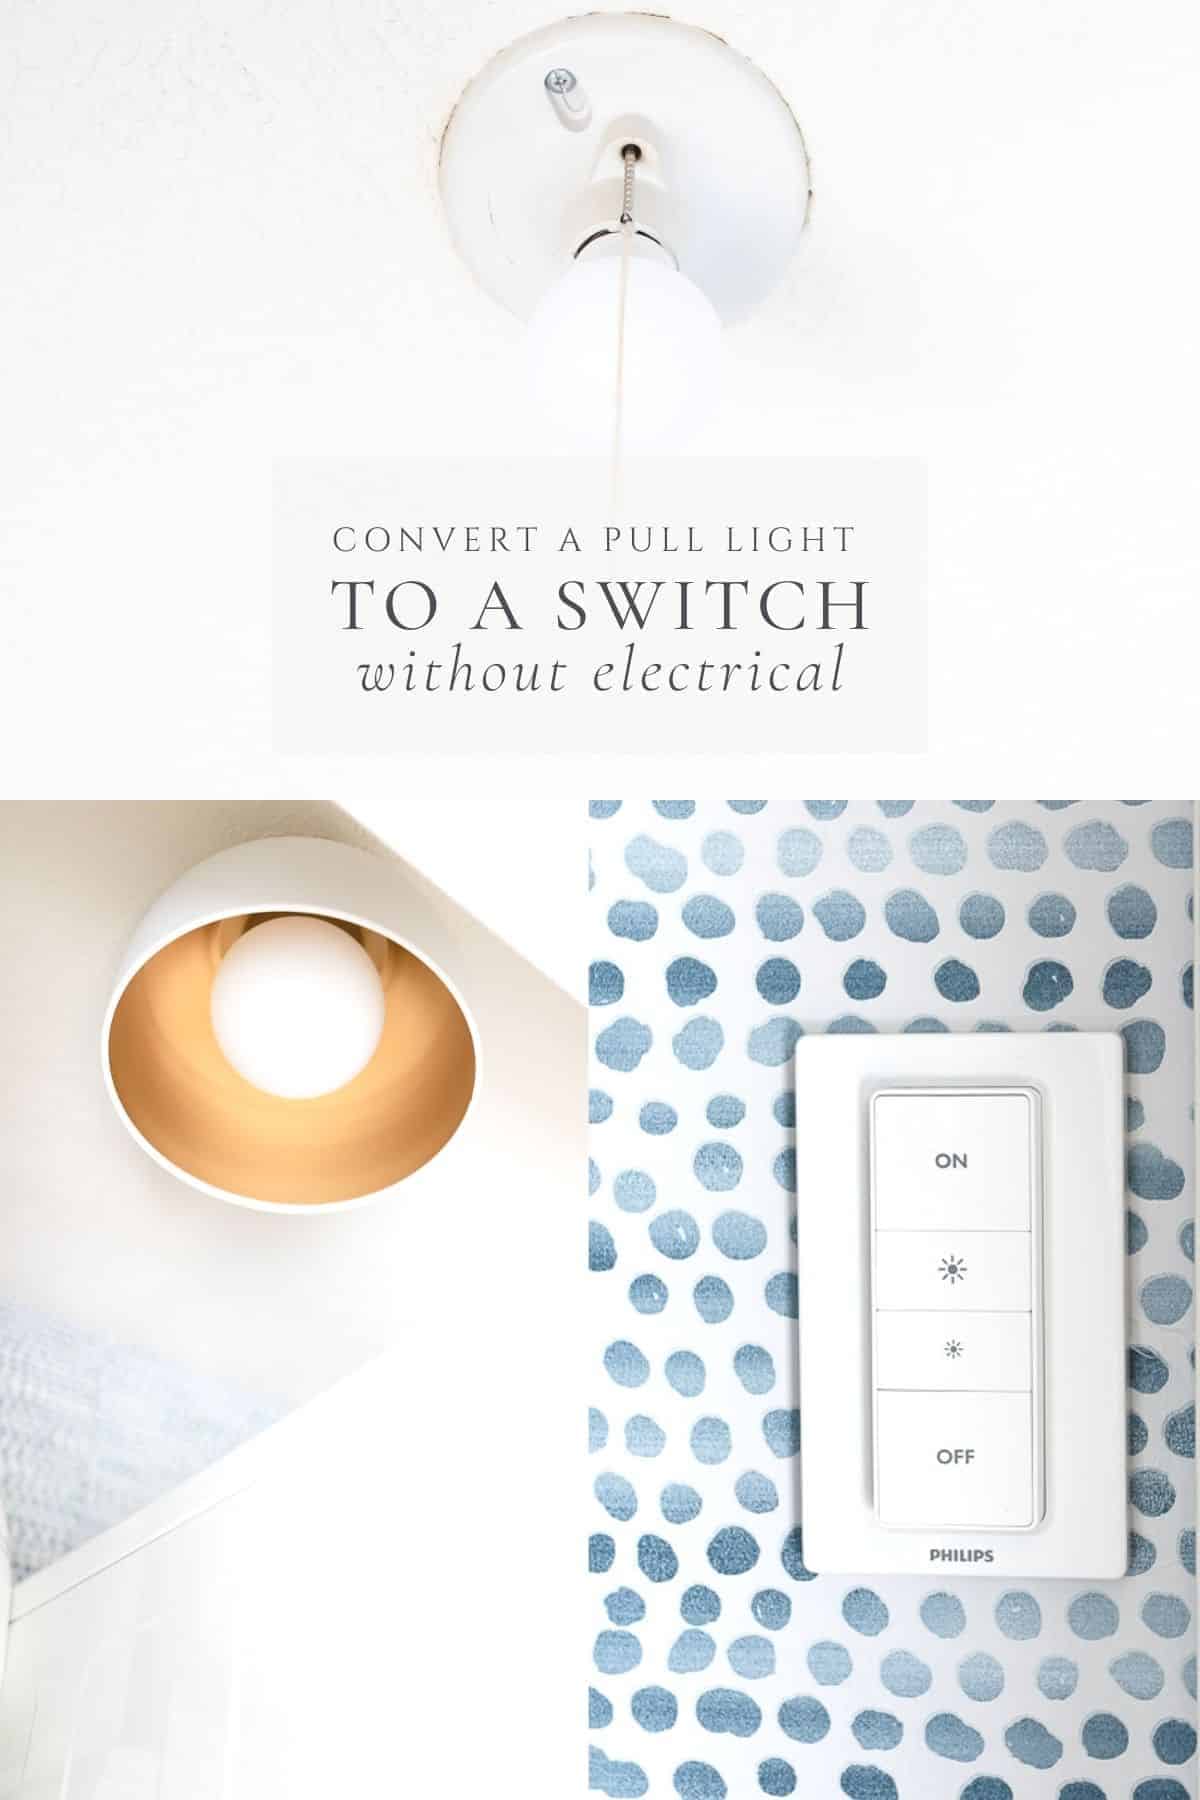 How To Fix Pull String Light How to Turn a Pull Chain Light Fixture into a Switch | Julie Blanner